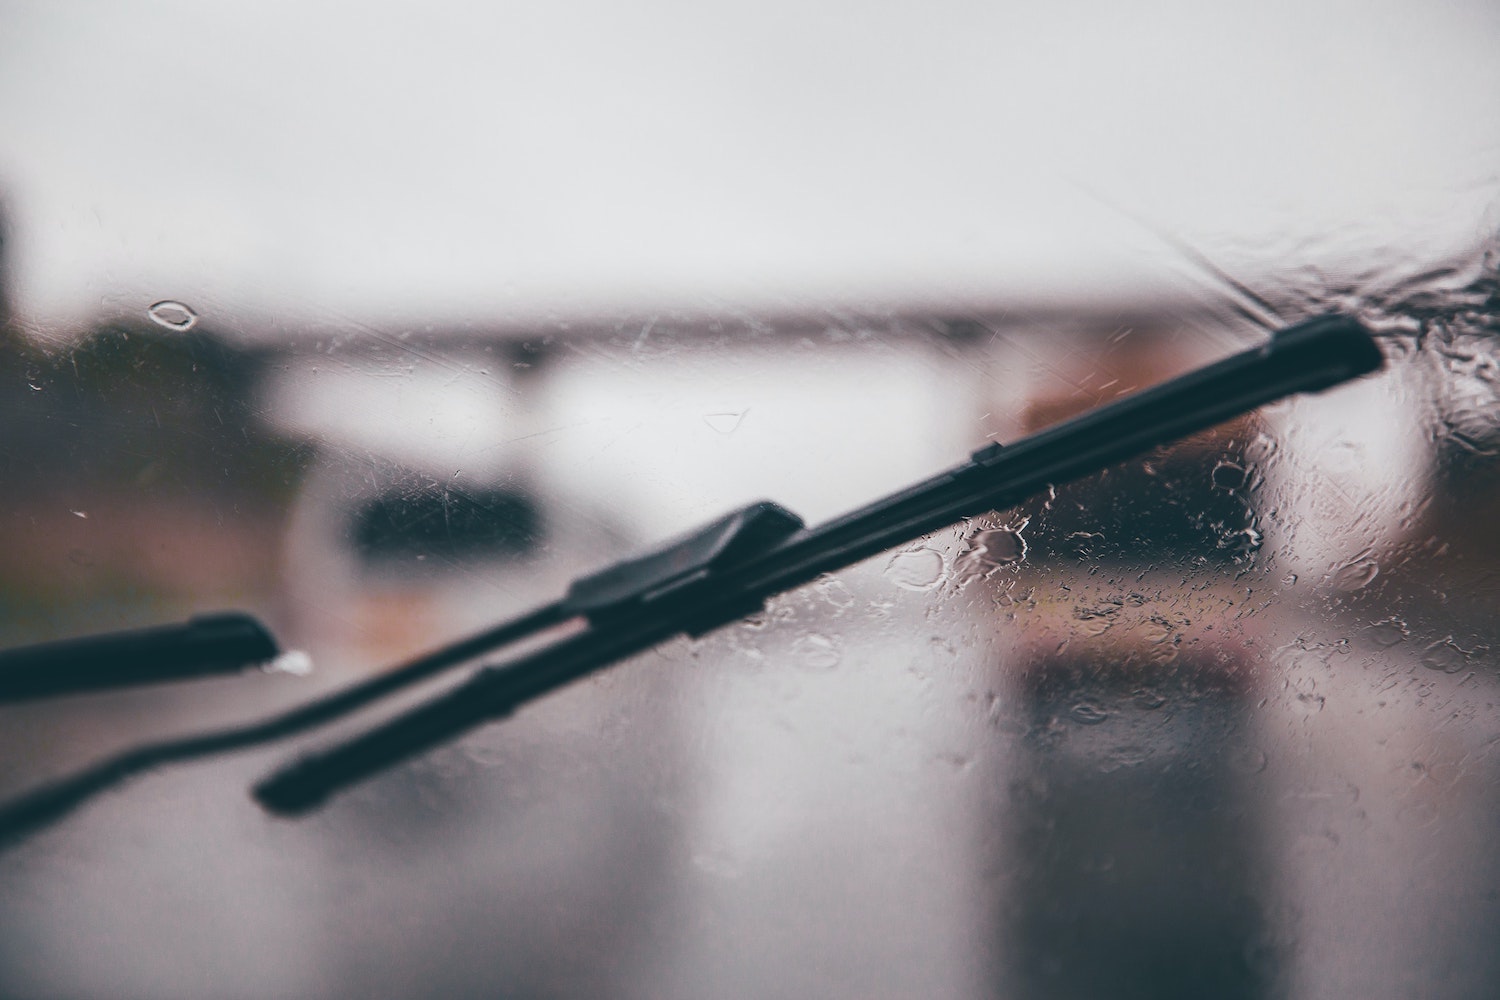 Wipers cleaning a wet windshield, a rainy road visible in the background.